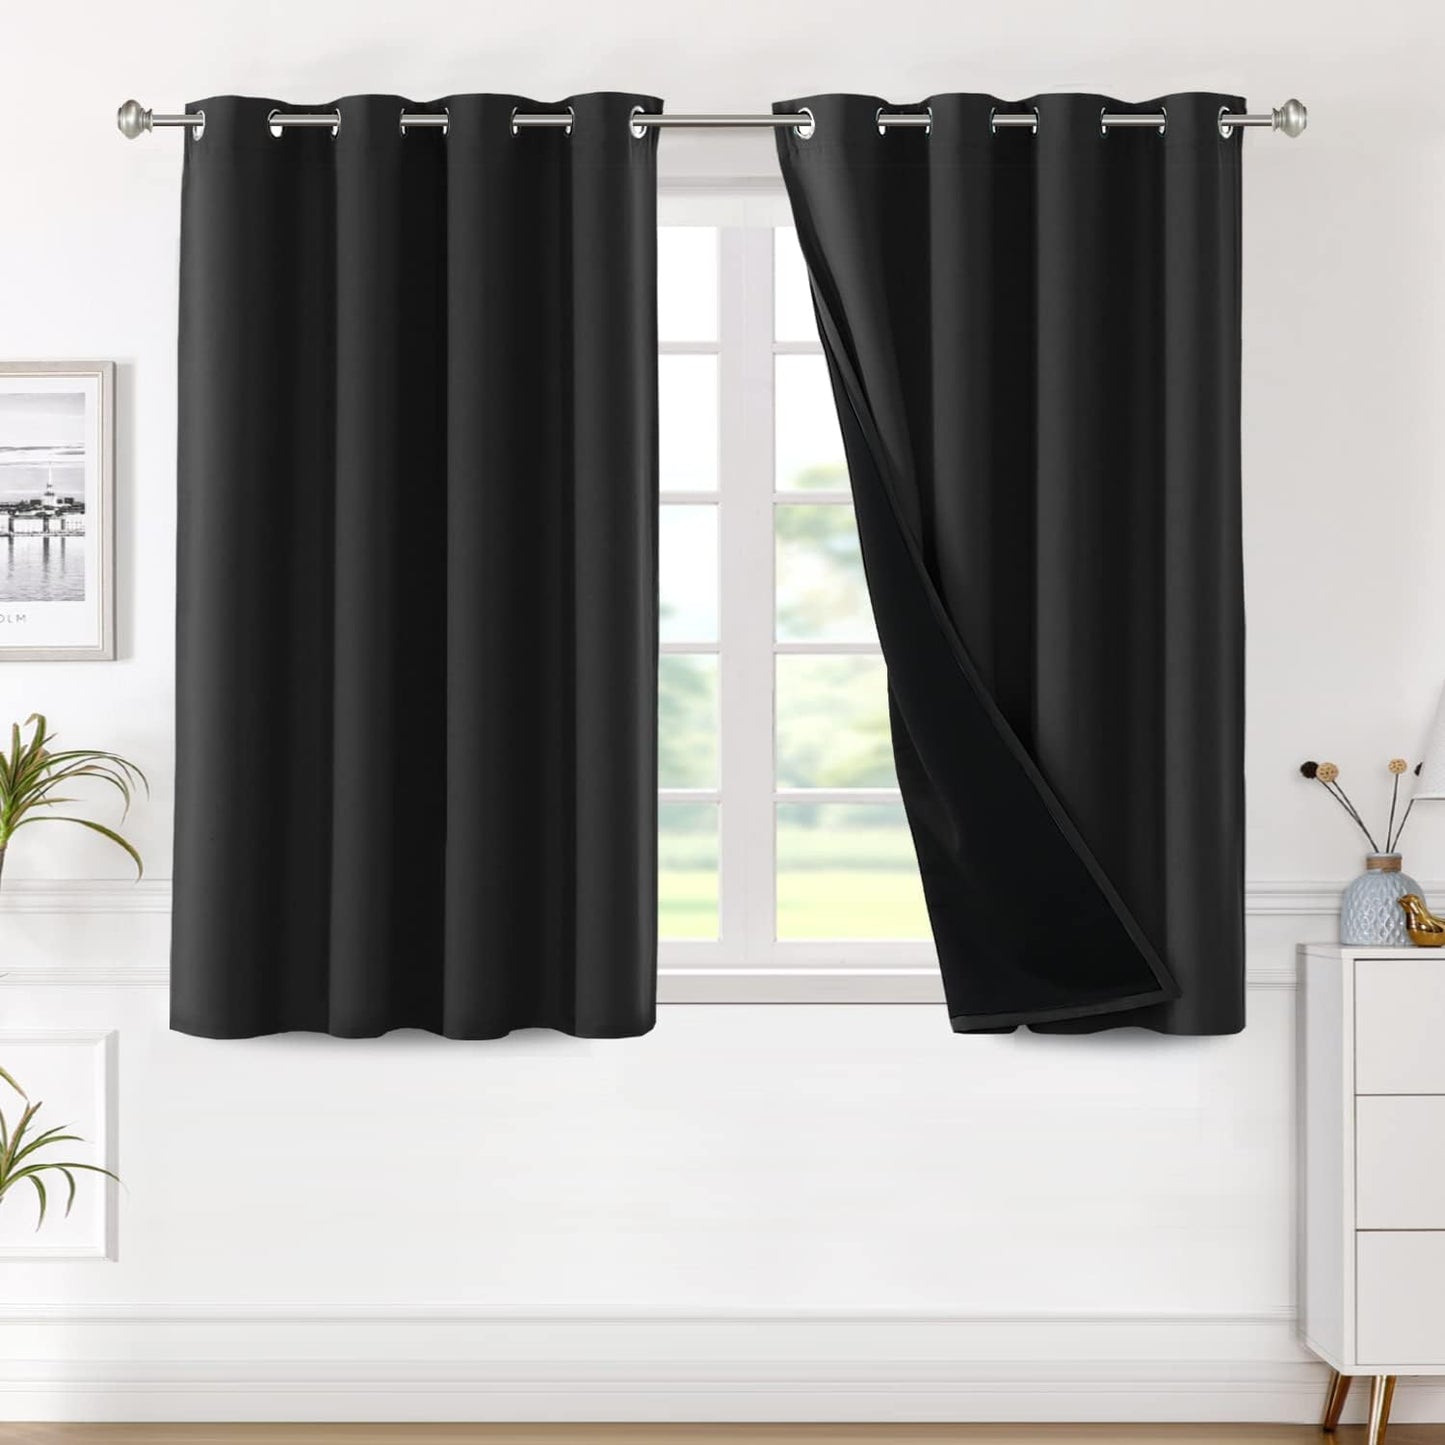 H.VERSAILTEX Blackout Curtains with Liner Backing, Thermal Insulated Curtains for Living Room, Noise Reducing Drapes, White, 52 Inches Wide X 96 Inches Long per Panel, Set of 2 Panels  H.VERSAILTEX Black 52"W X 45"L 